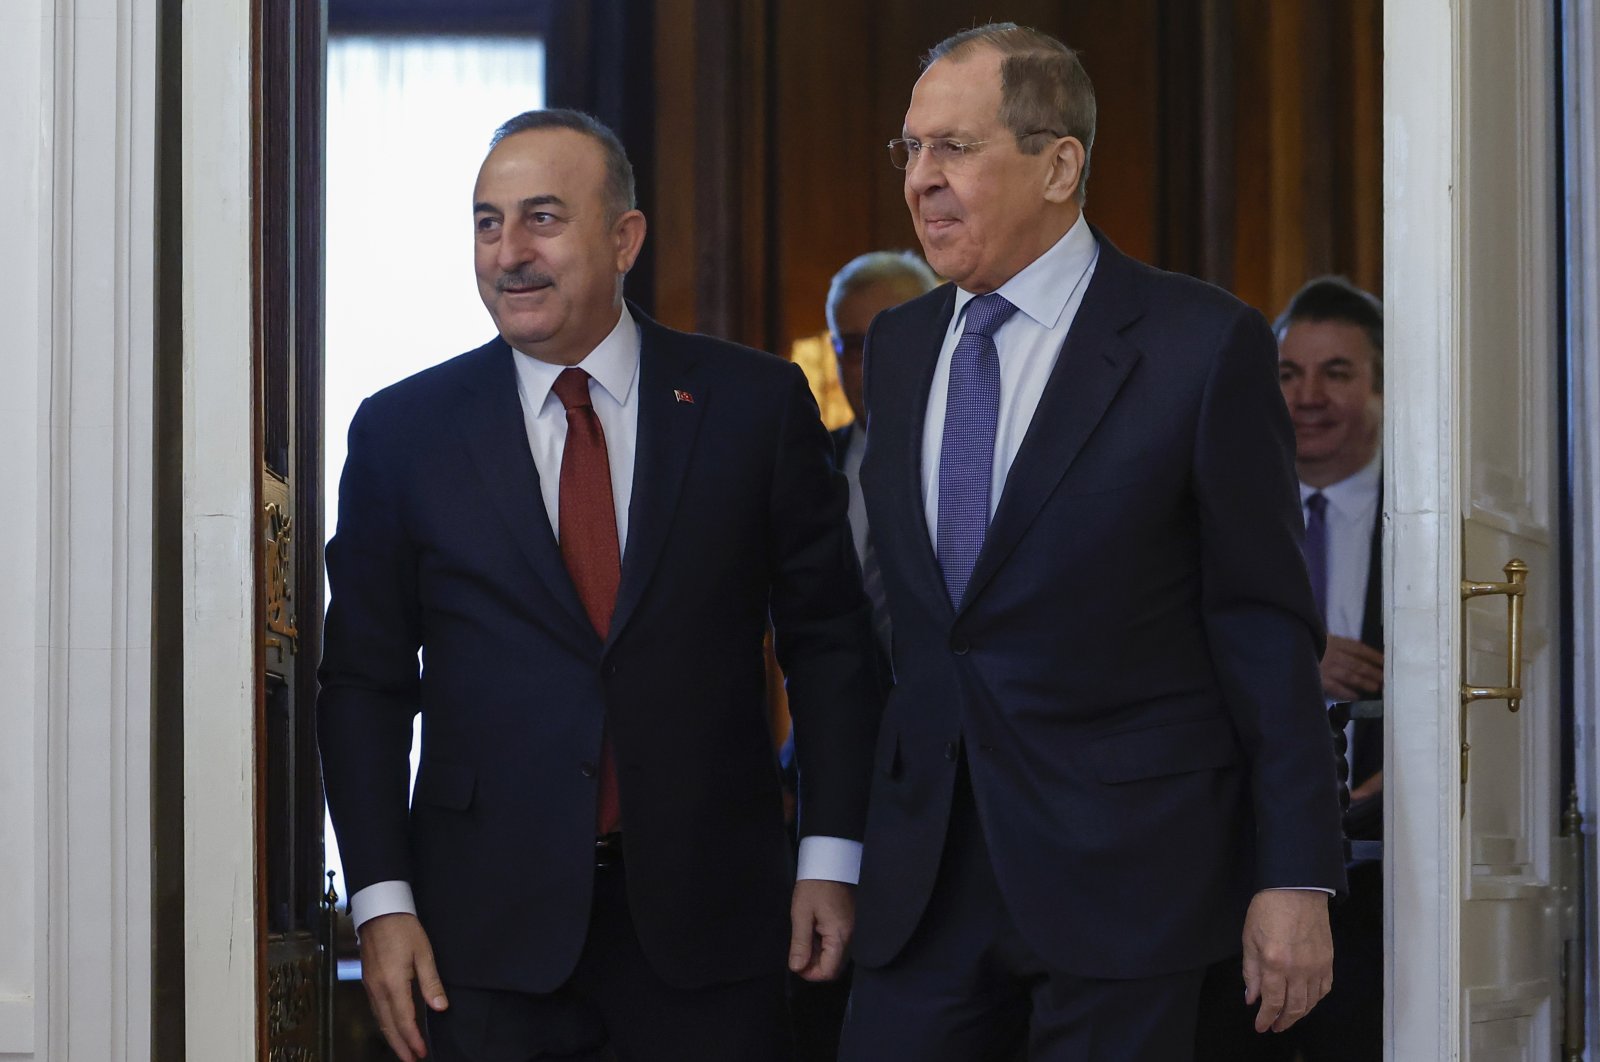 Foreign Minister Mevlüt Çavuşoğlu (L) and Russian Foreign Minister Sergey Lavrov enter a hall for their talks in Moscow, Russia, March 16, 2022. (AP Photo)